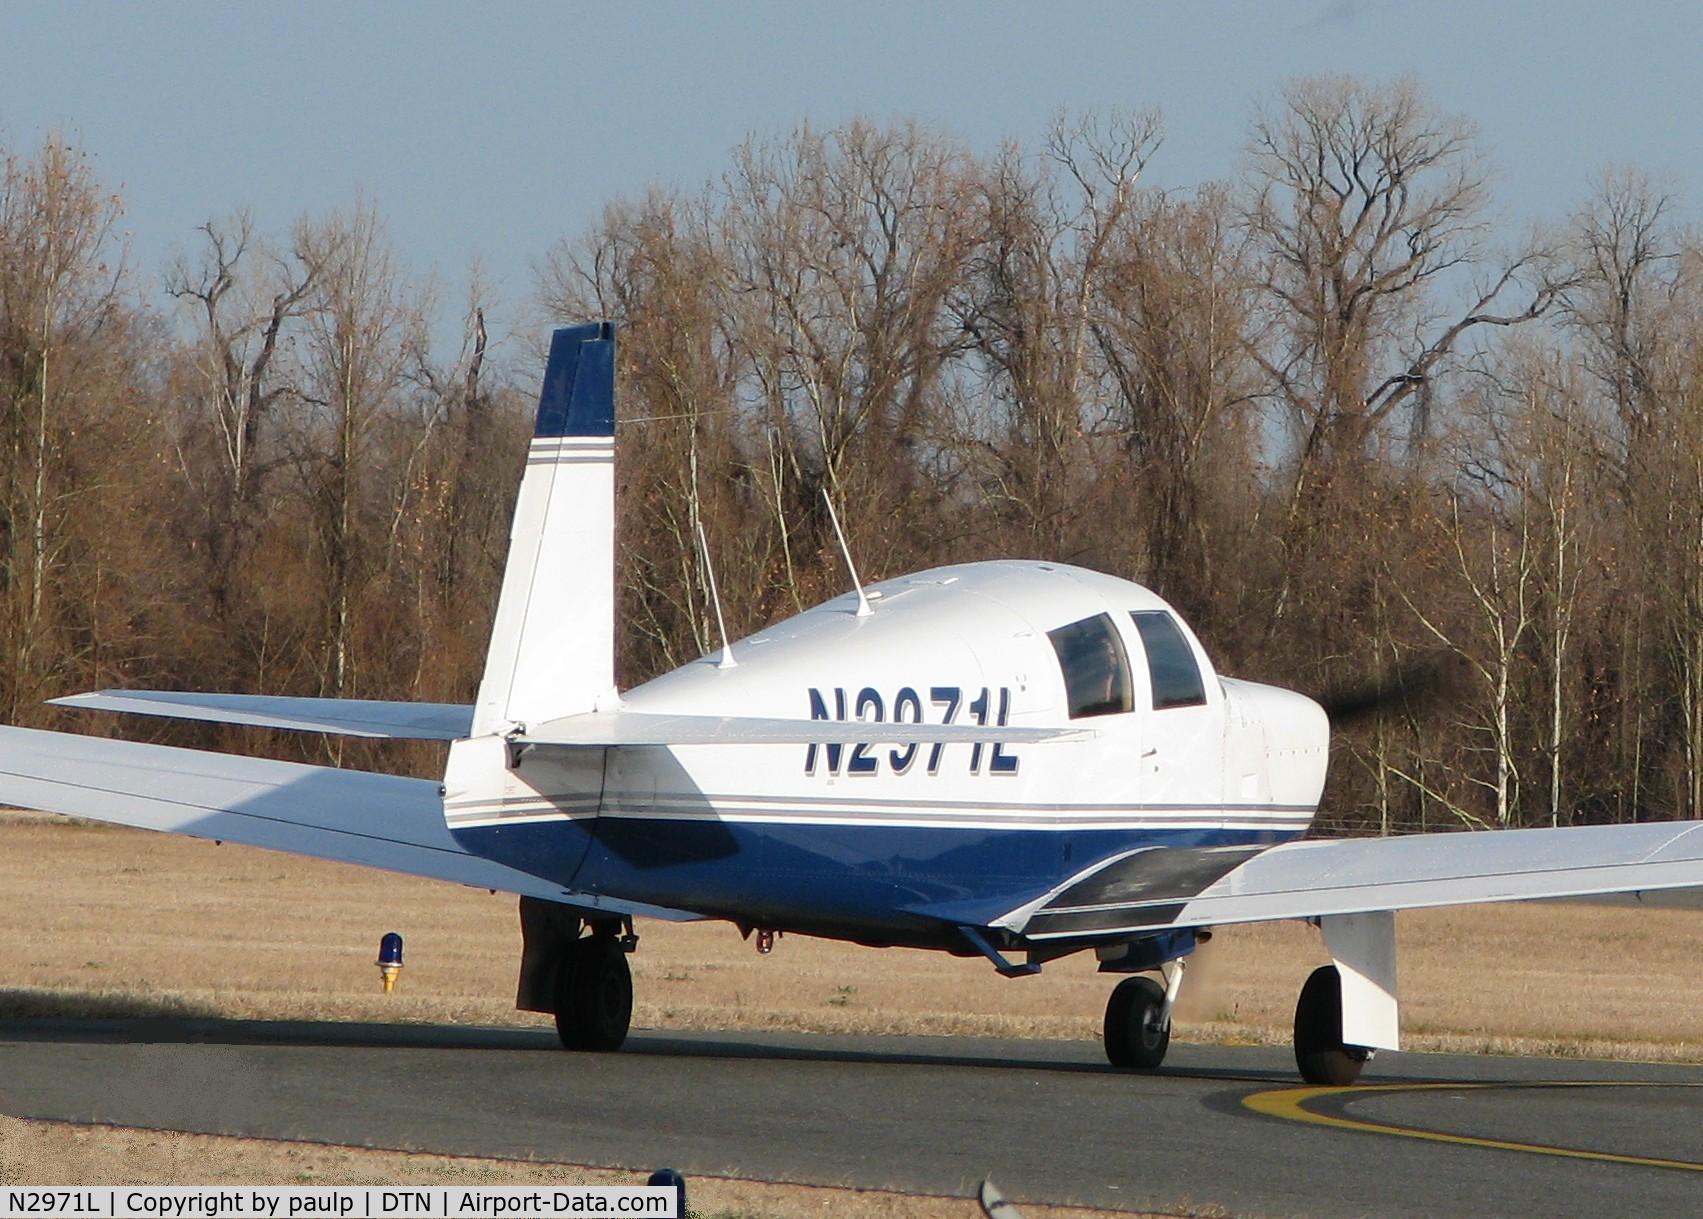 N2971L, 1967 Mooney M20C Ranger C/N 680002, Running up before taking off at the Downtown Shreveport airport.